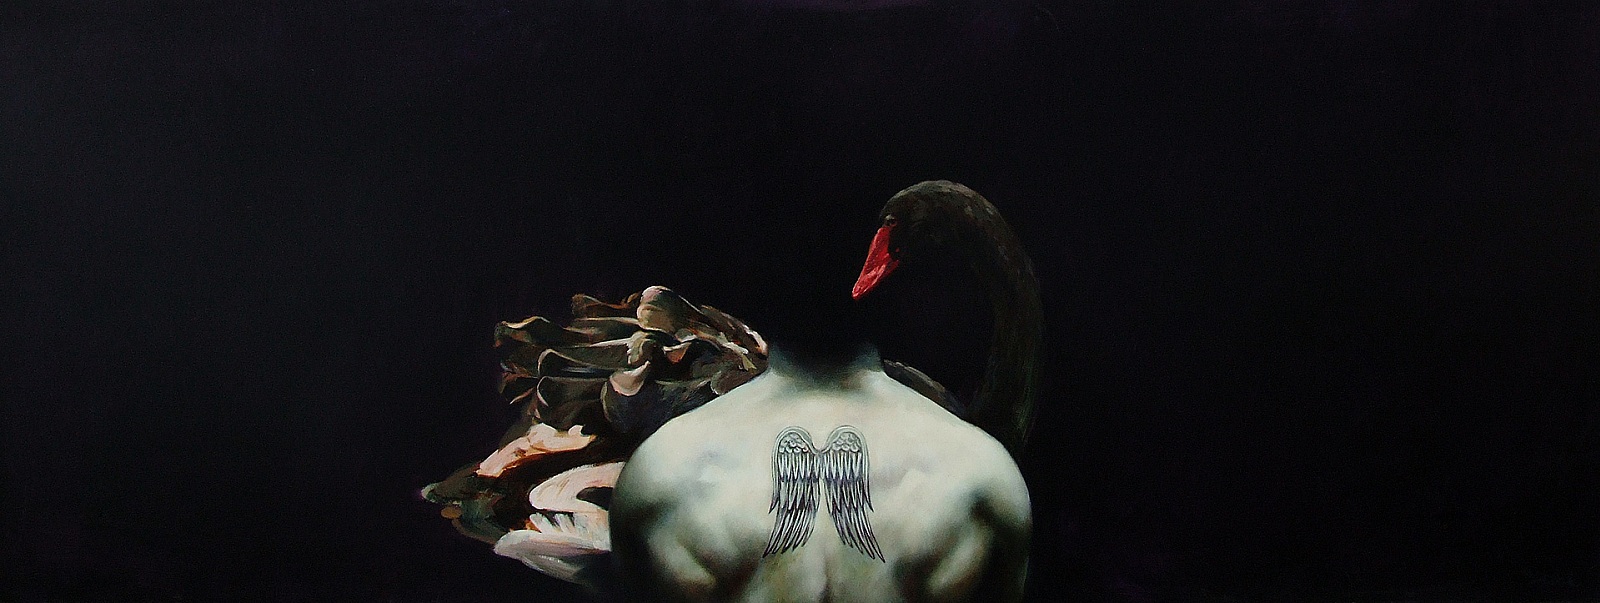 Black Swan - 2005, oil on canvas, 100 x 230 cm, private collection, RO - 7